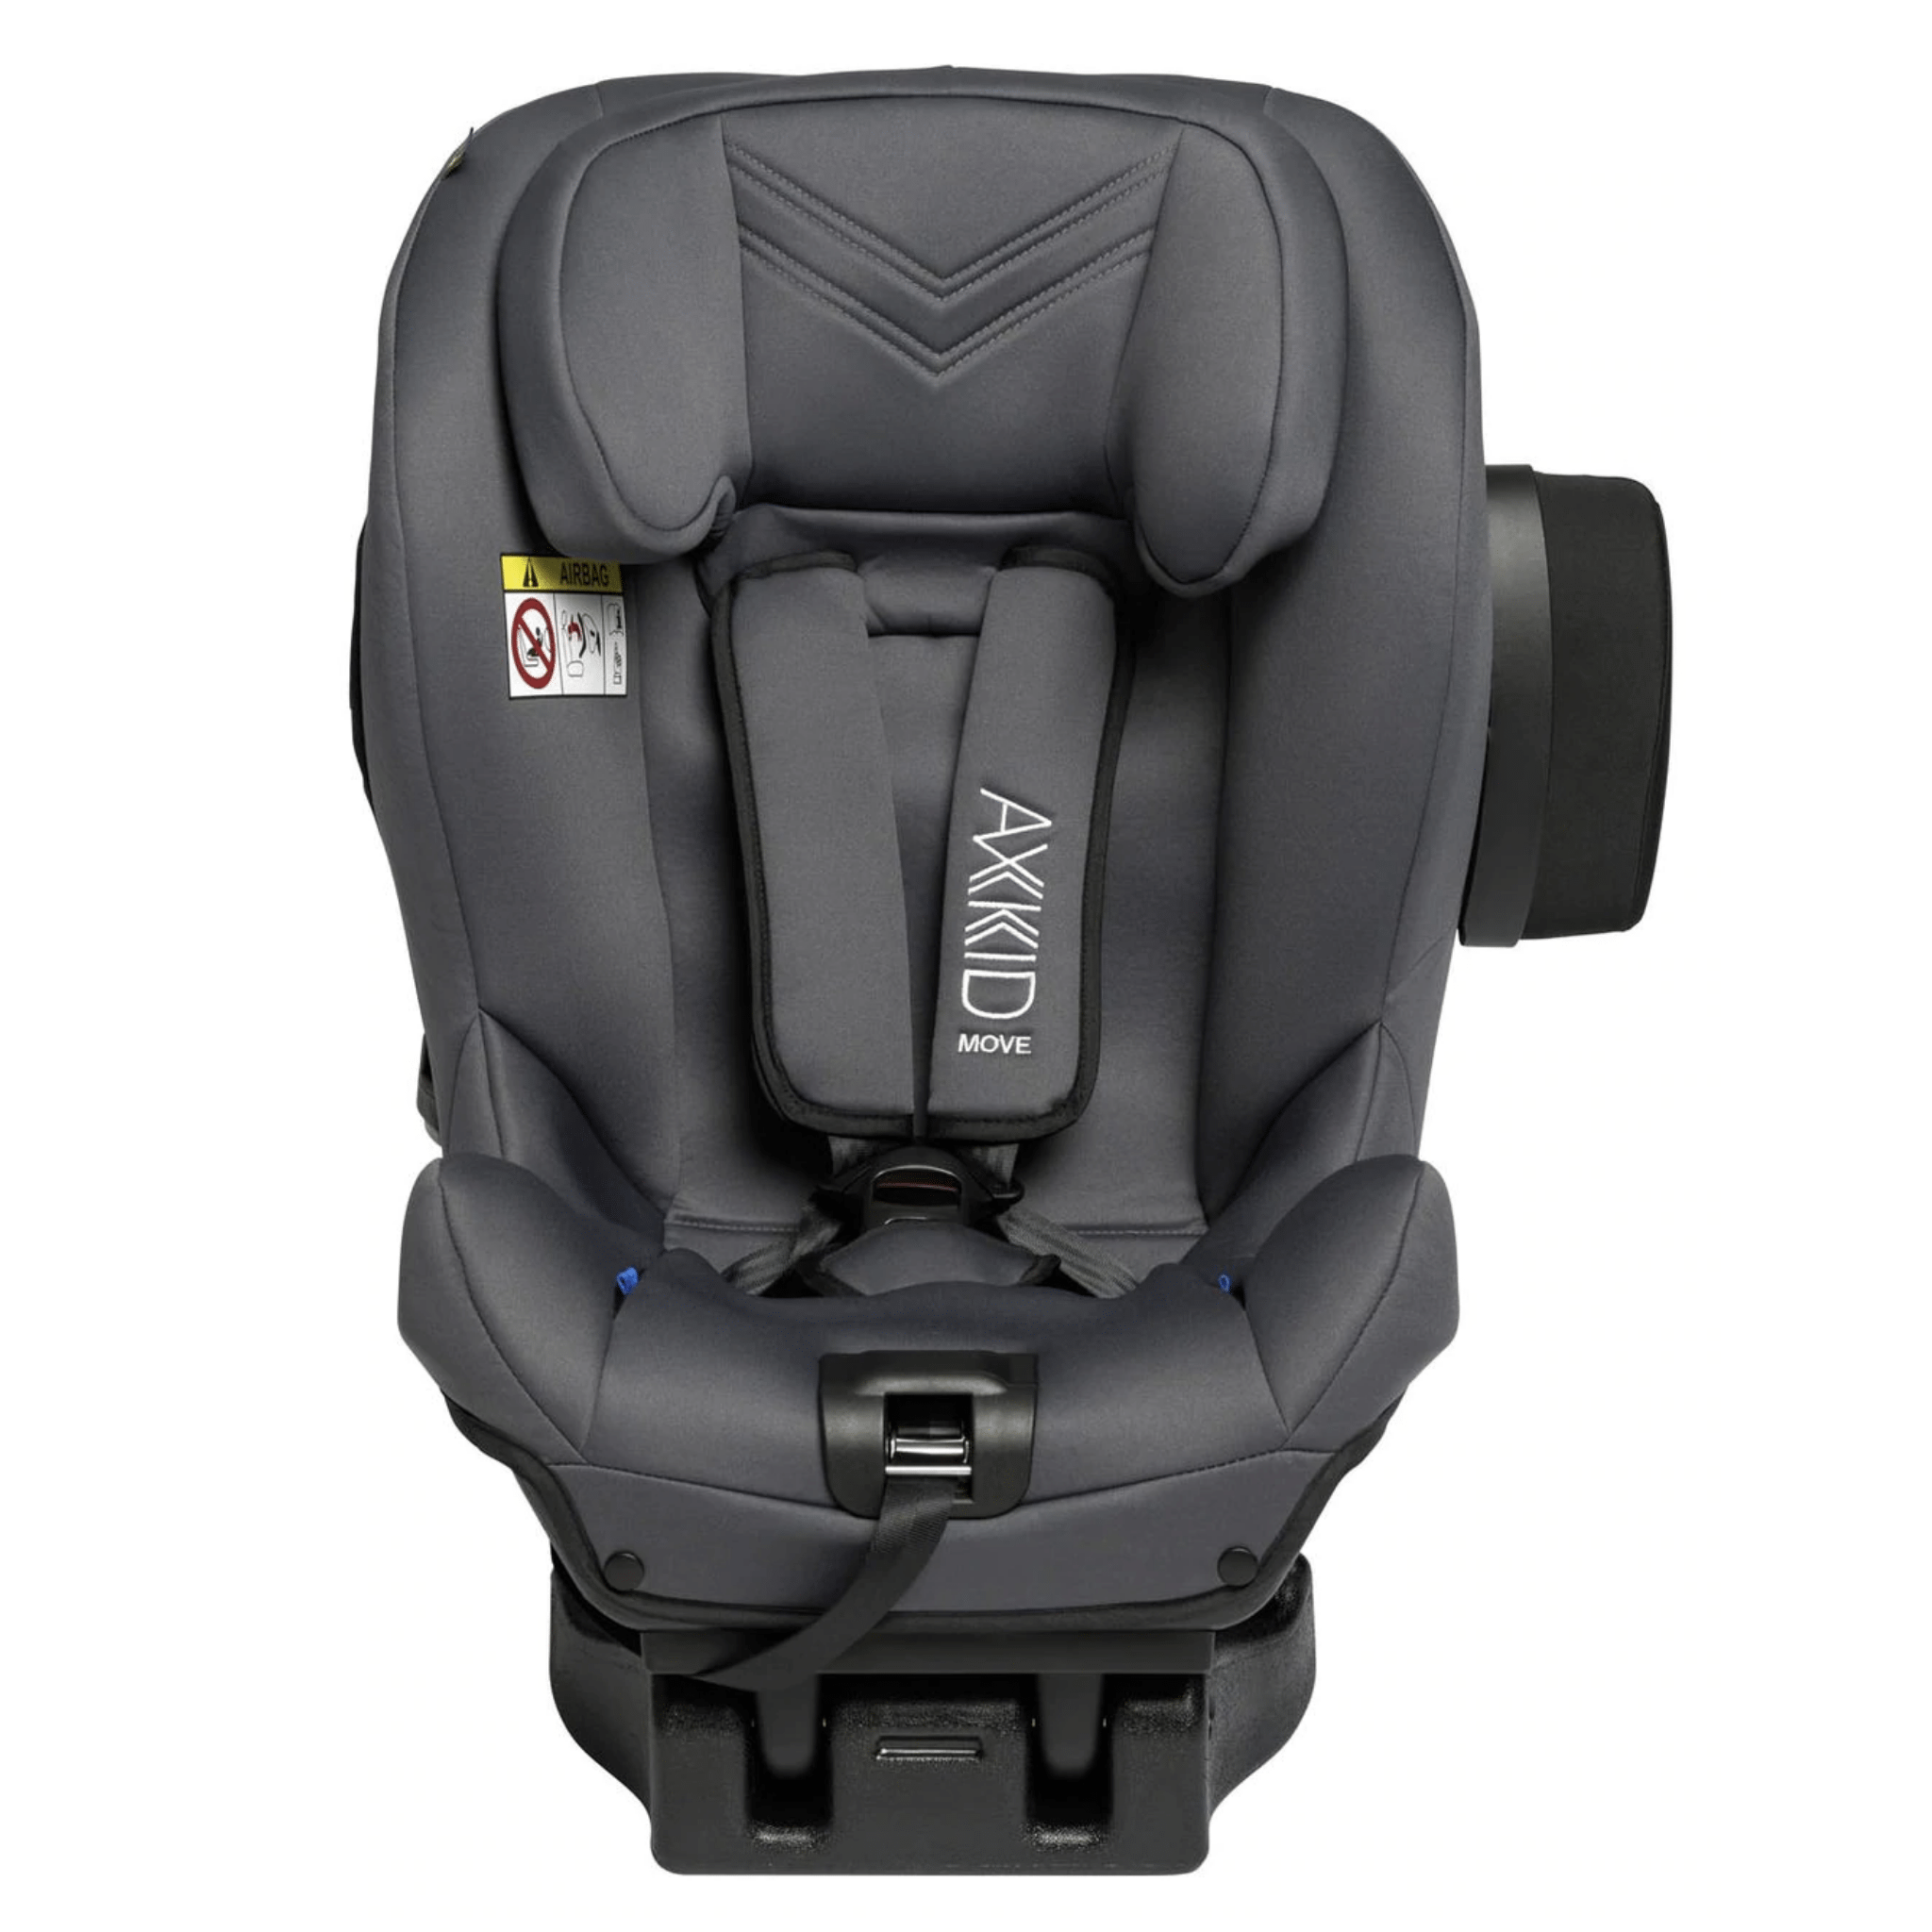 Axkid rear facing car seats Axkid Move Car Seat with free accessory - Granite